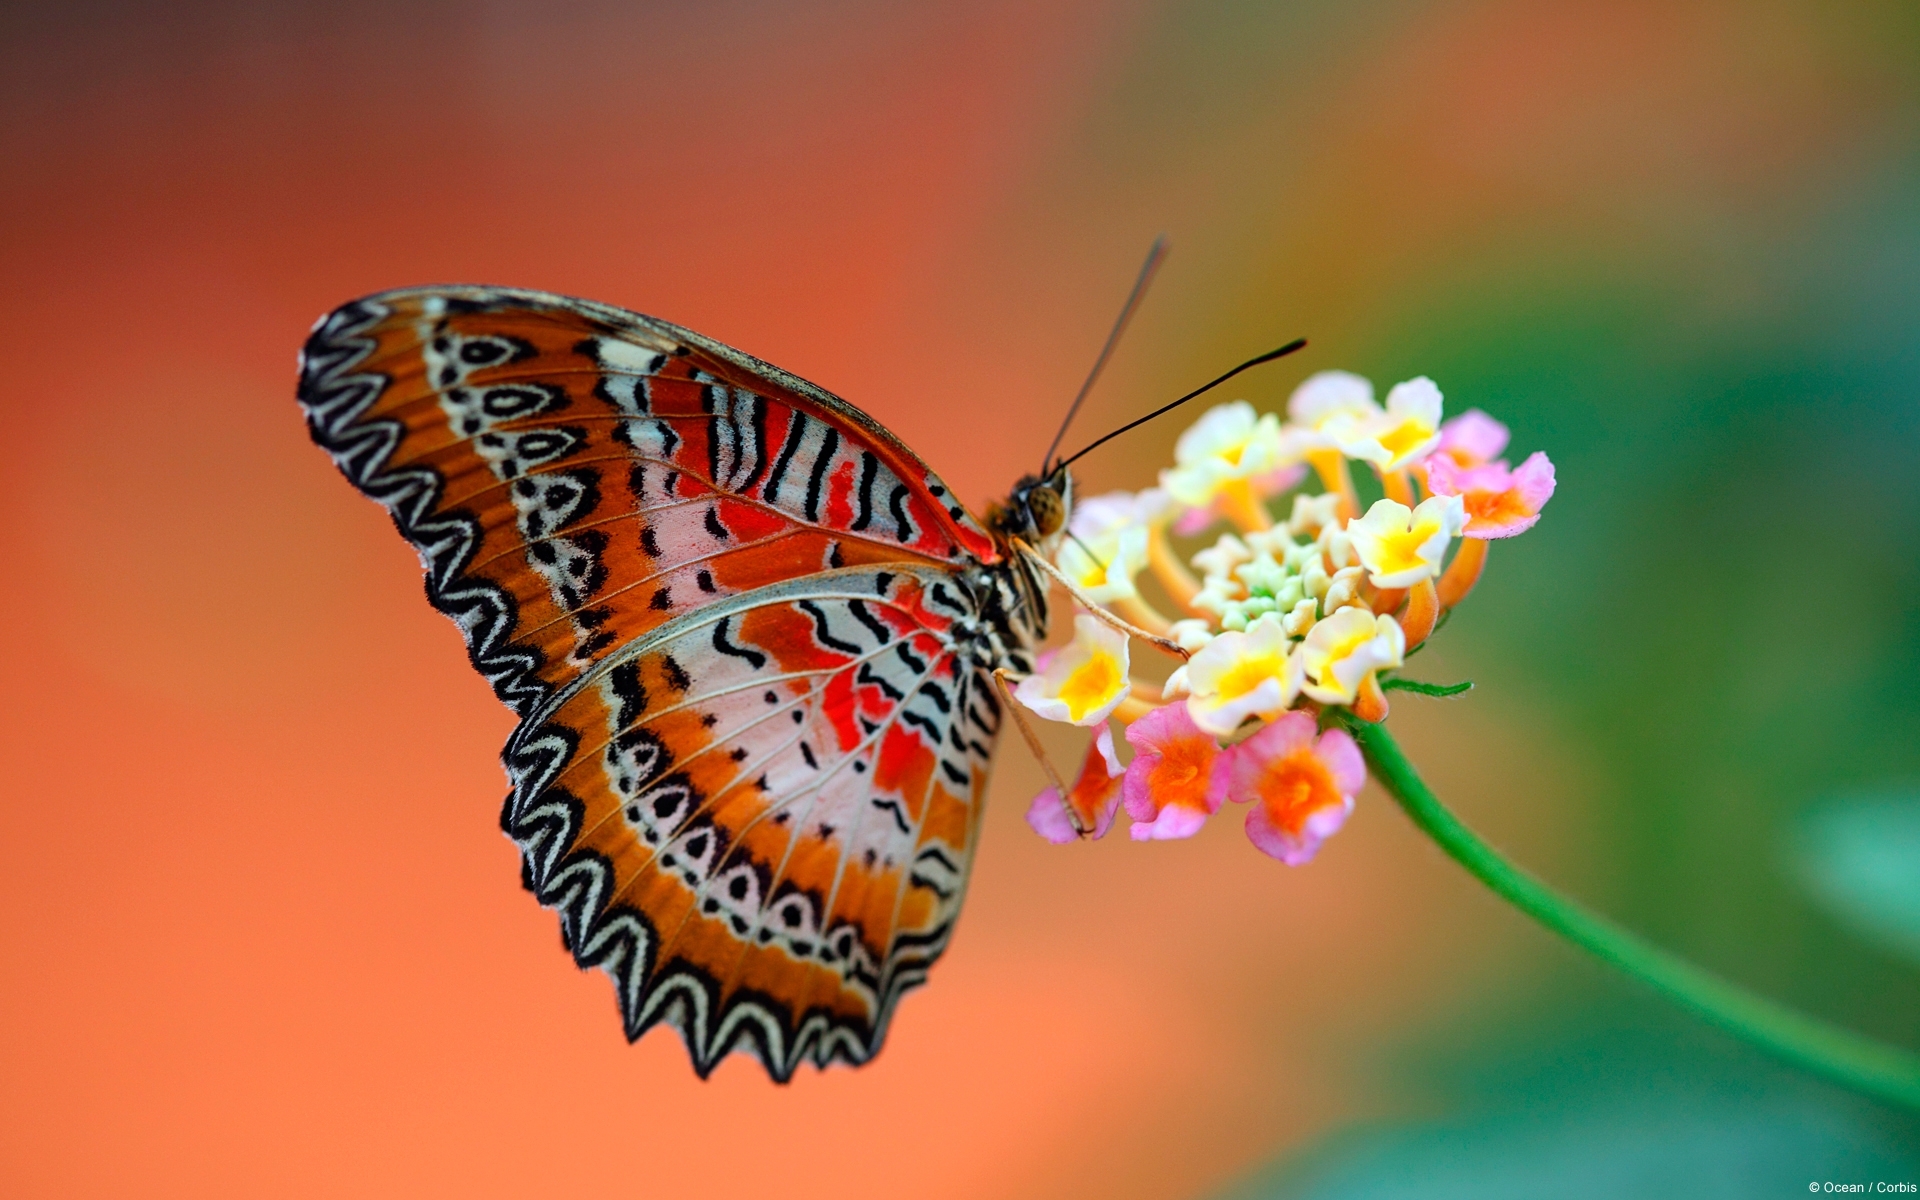 10 Latest Flowers With Butterfly Wallpaper Hd FULL HD 1080p For PC